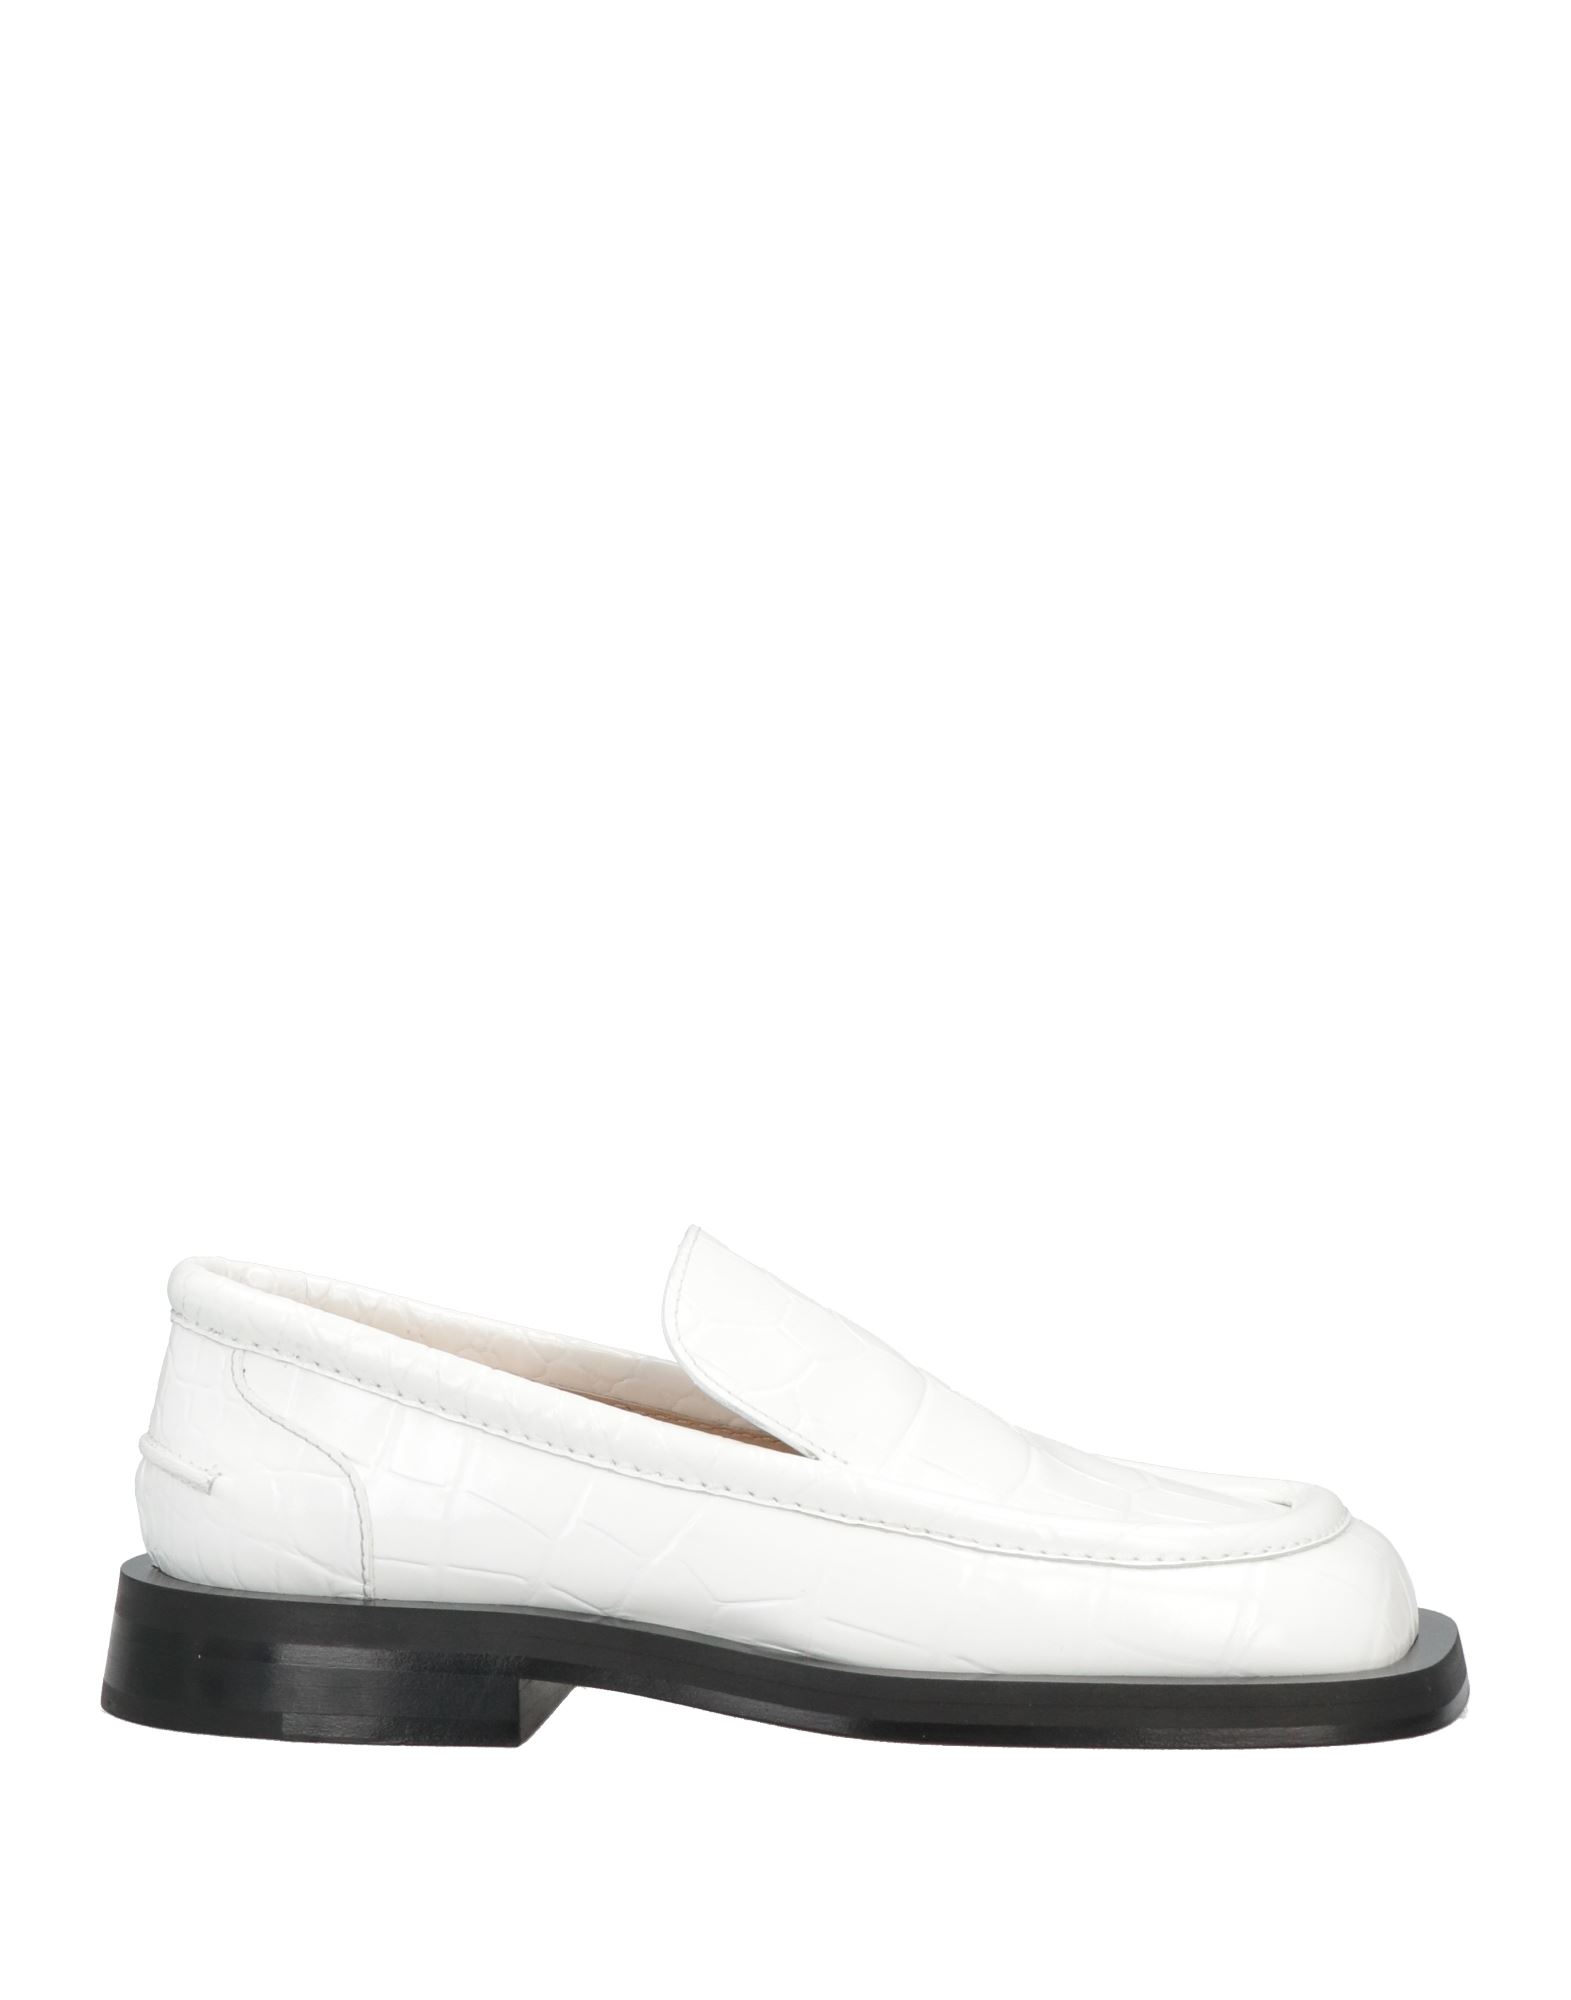 Proenza Schouler Loafers In White